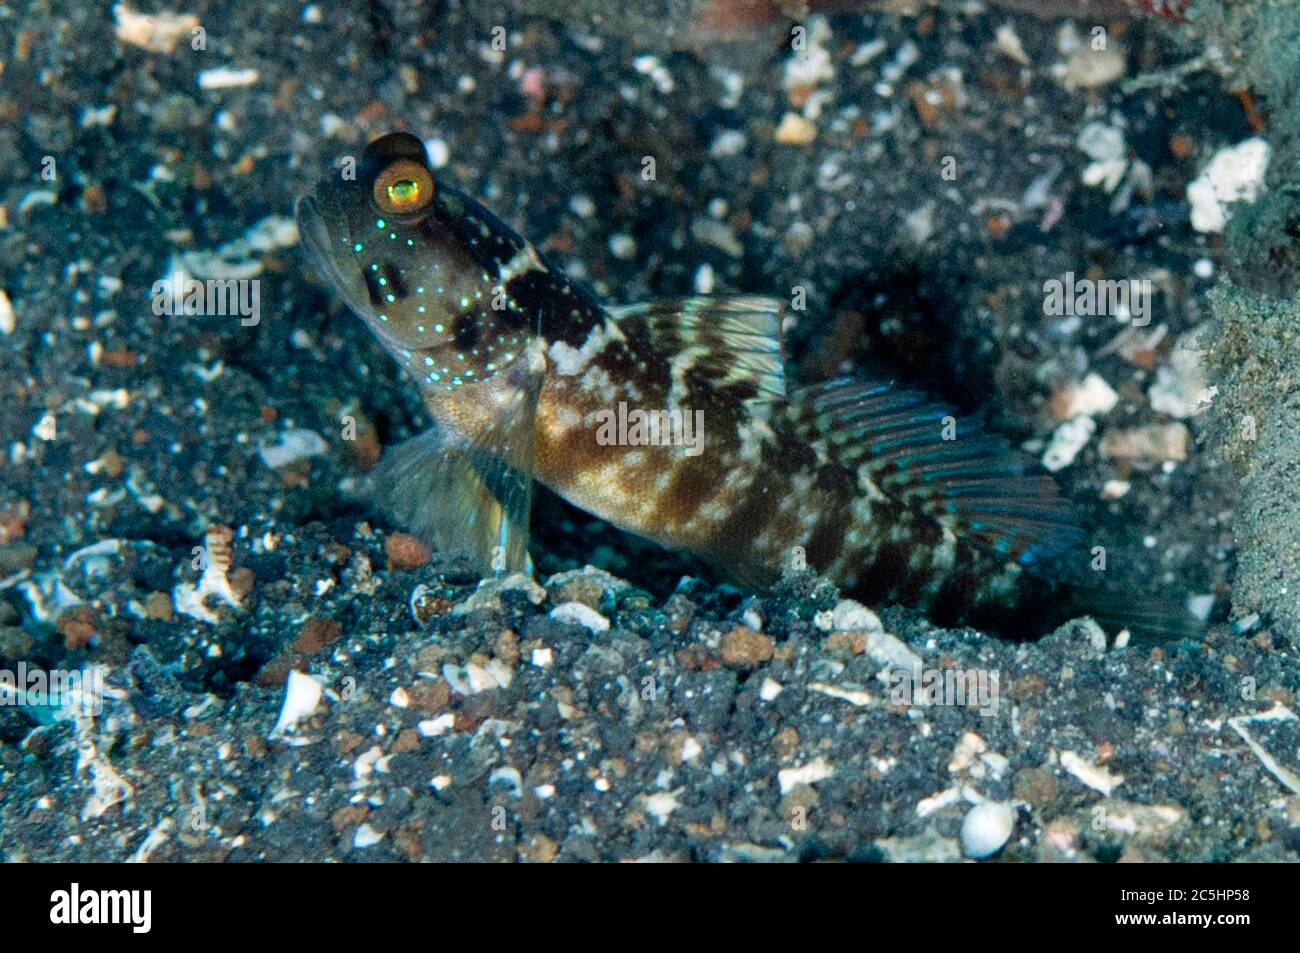 Ventral-Barred Shrimpgoby, Cryptocentrus sericus, on sand by hole, TK2 dive site, Lembeh Straits, Sulawesi, Indonesia Stock Photo